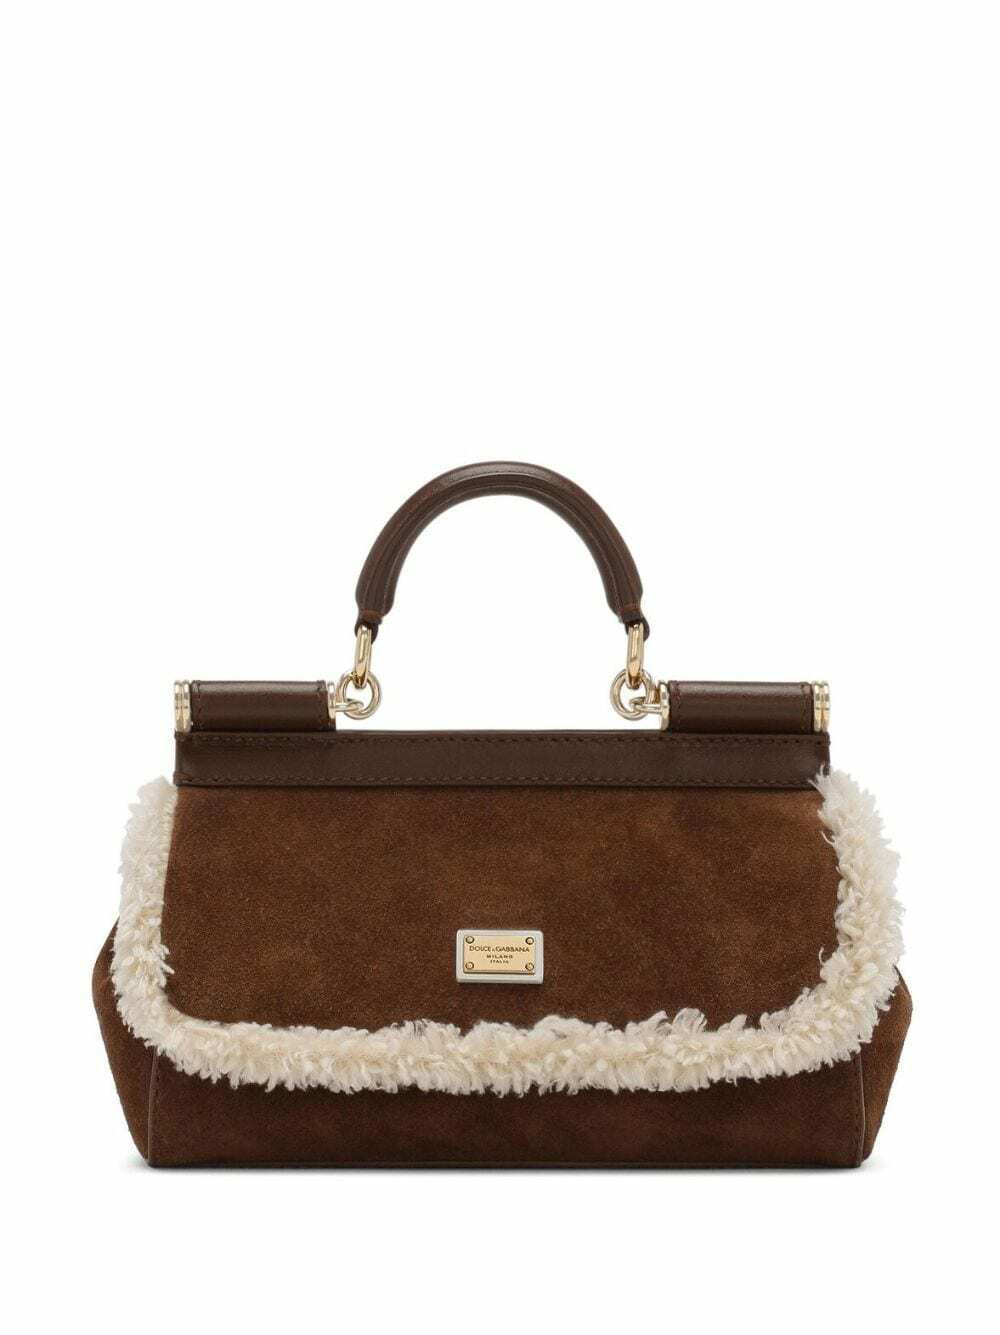 Totes bags Dolce & Gabbana - Small 'sicily' bag in patent leather